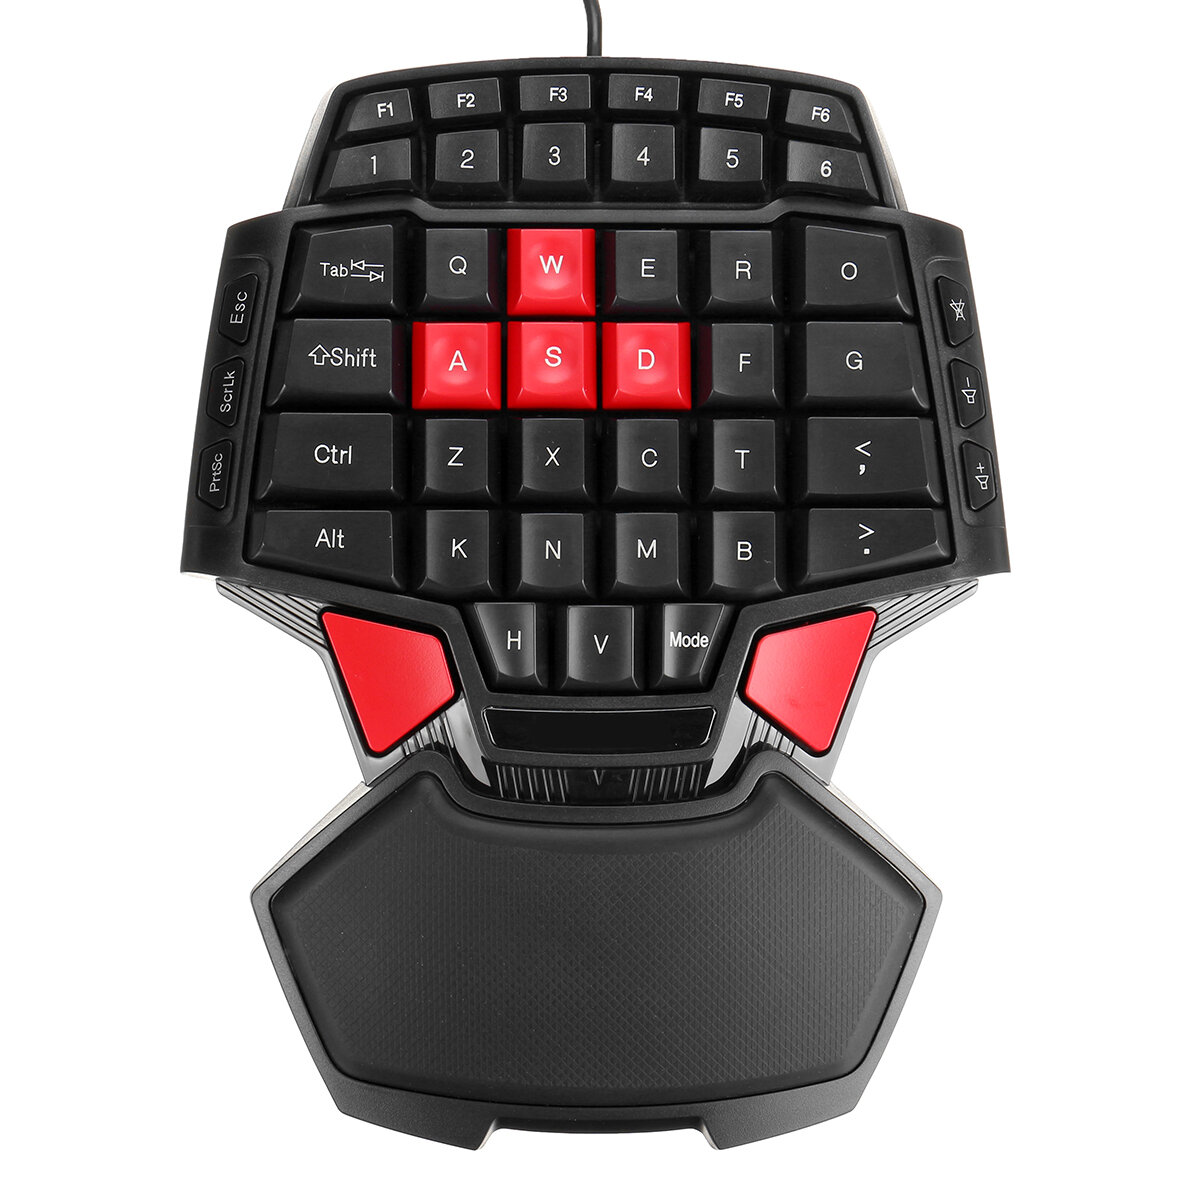 Wired 3200 dpi Mouse for PS4 PC Game One-handed Ergonomic Keyboard for Xbox PC Laptop